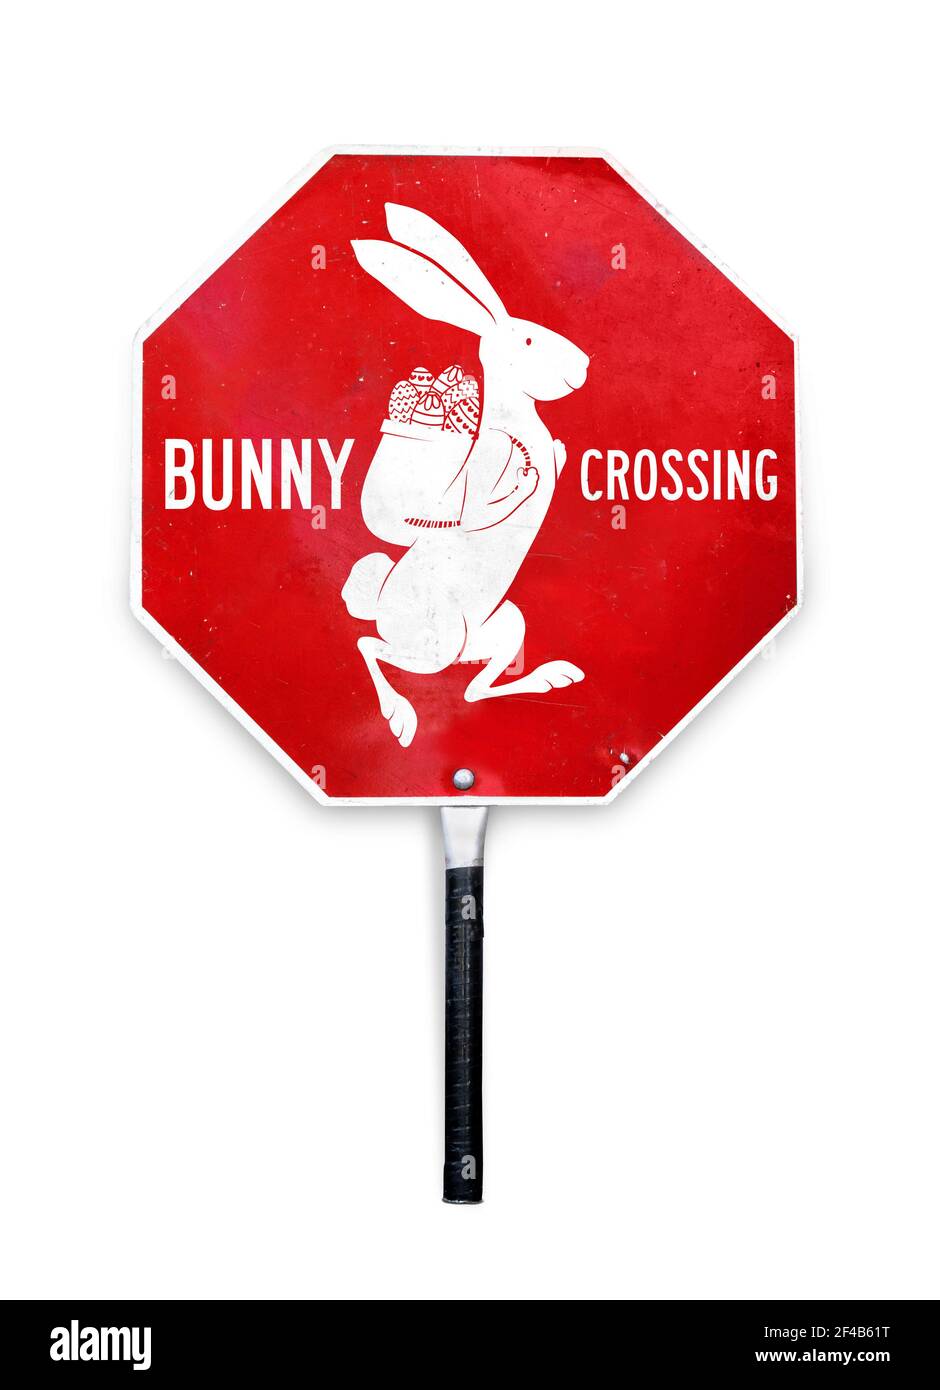 Stop bunny crossing sign. Silhouette of rabbit with basket filled with Easter eggs. Easter themed stop sign used to control traffic. Red and white met Stock Photo